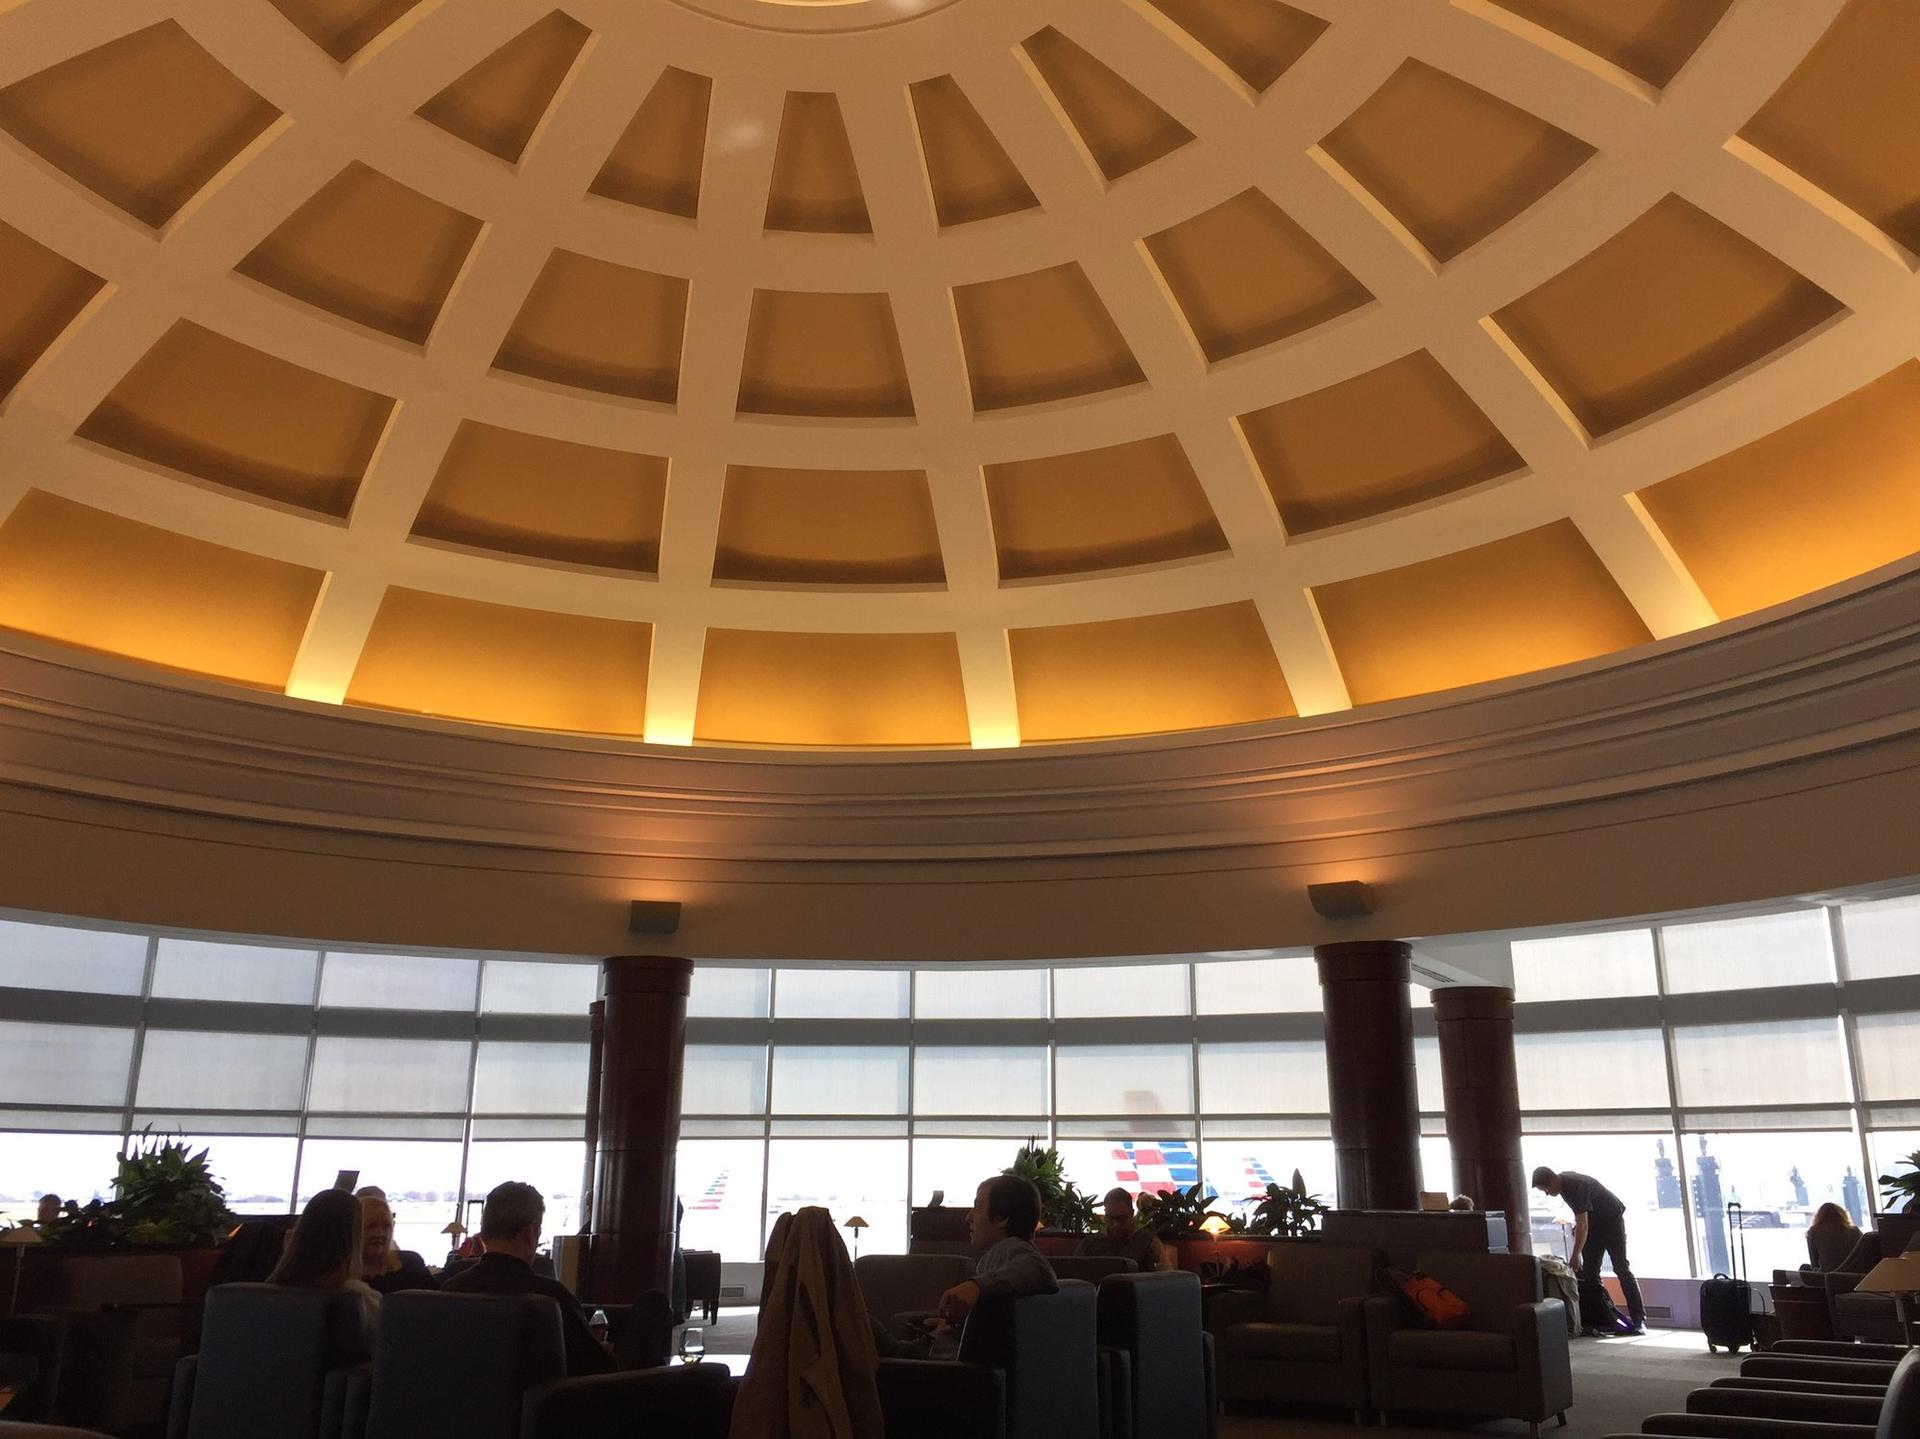 American Airlines Admirals Club image 15 of 37